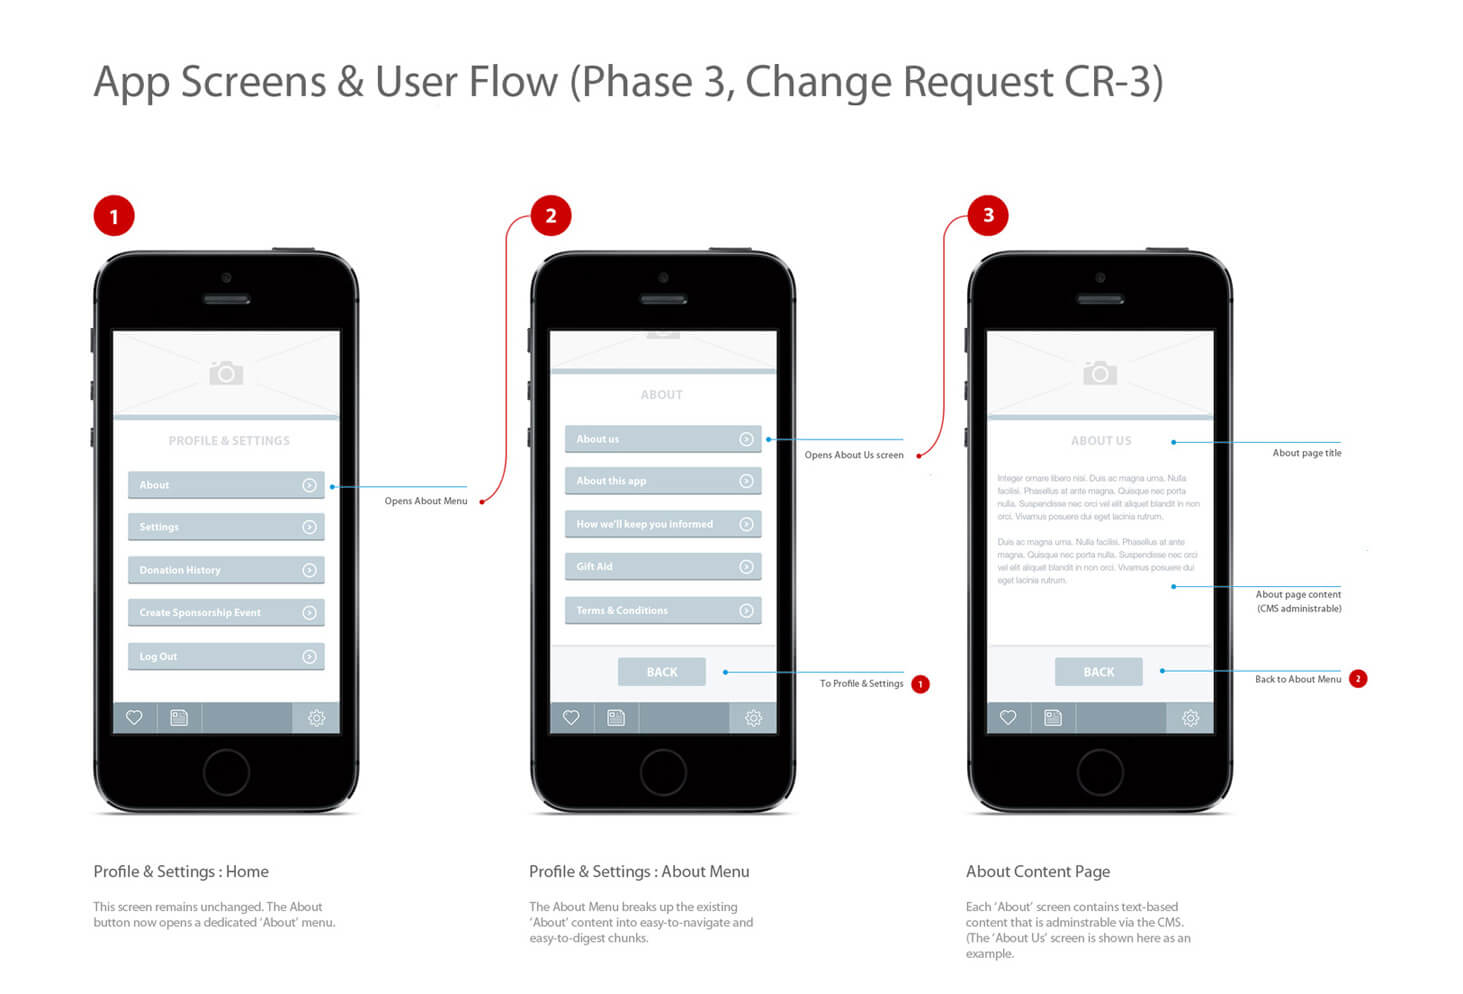 User flow change request example image